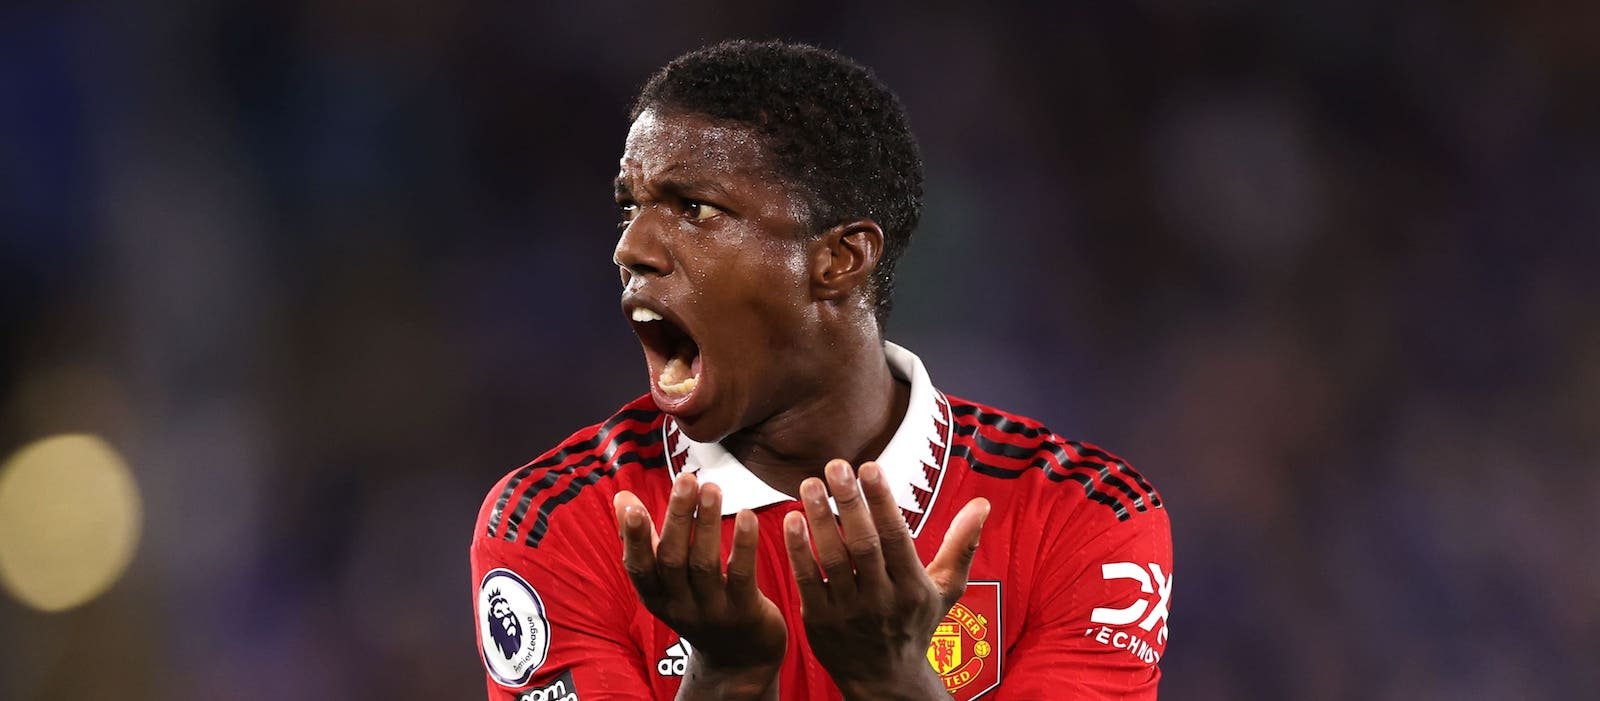 Video: Tyrell Malacia takes huge step in his injury recovery as he’s spotted doing individual training work – Man United News And Transfer News